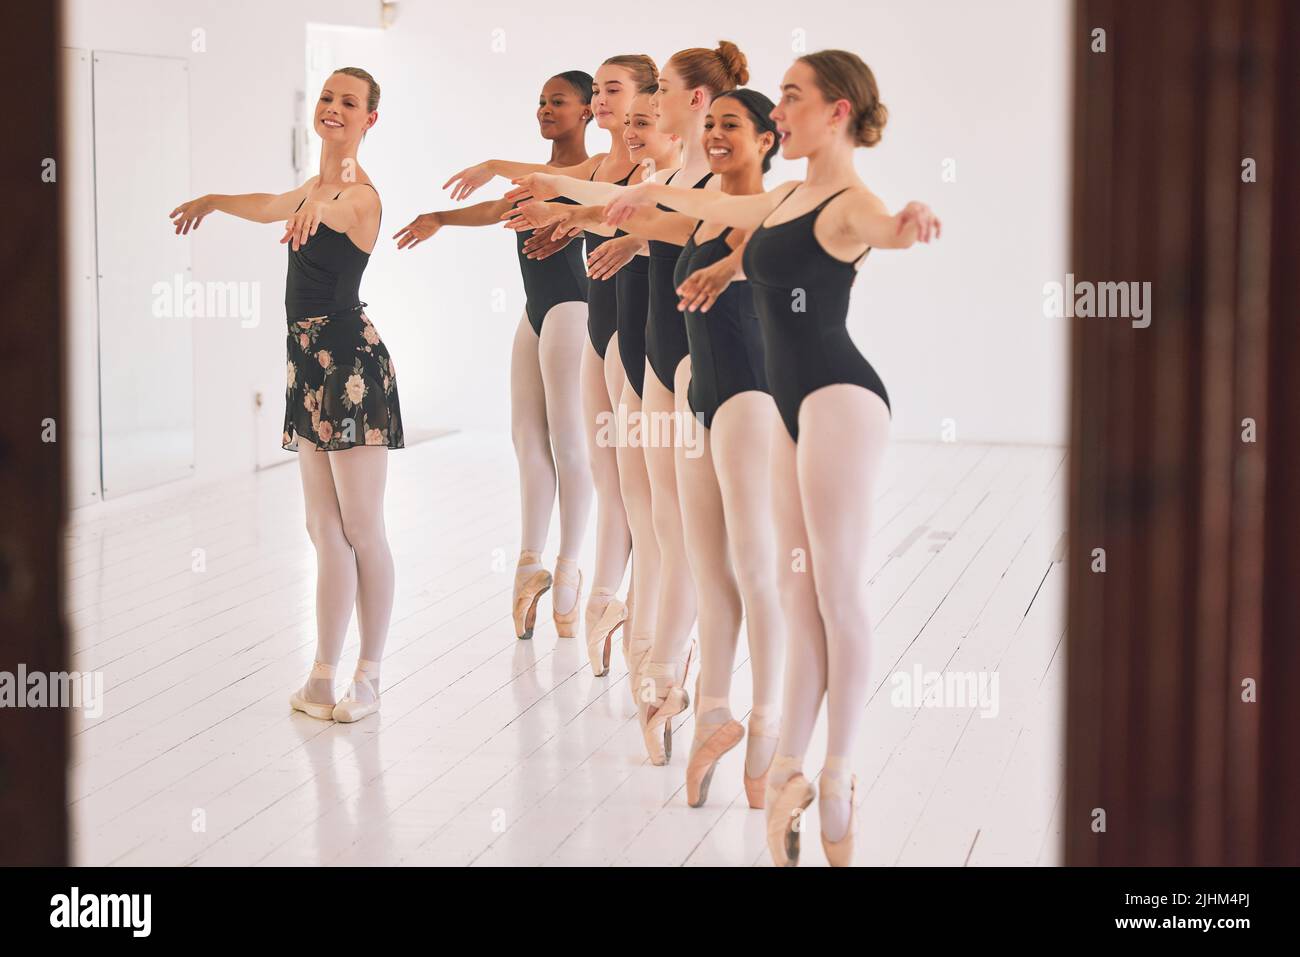 Young woman dance instructor teaching a ballet class to a group of a children in her studio. Ballerina teacher working with girl students, preparing Stock Photo